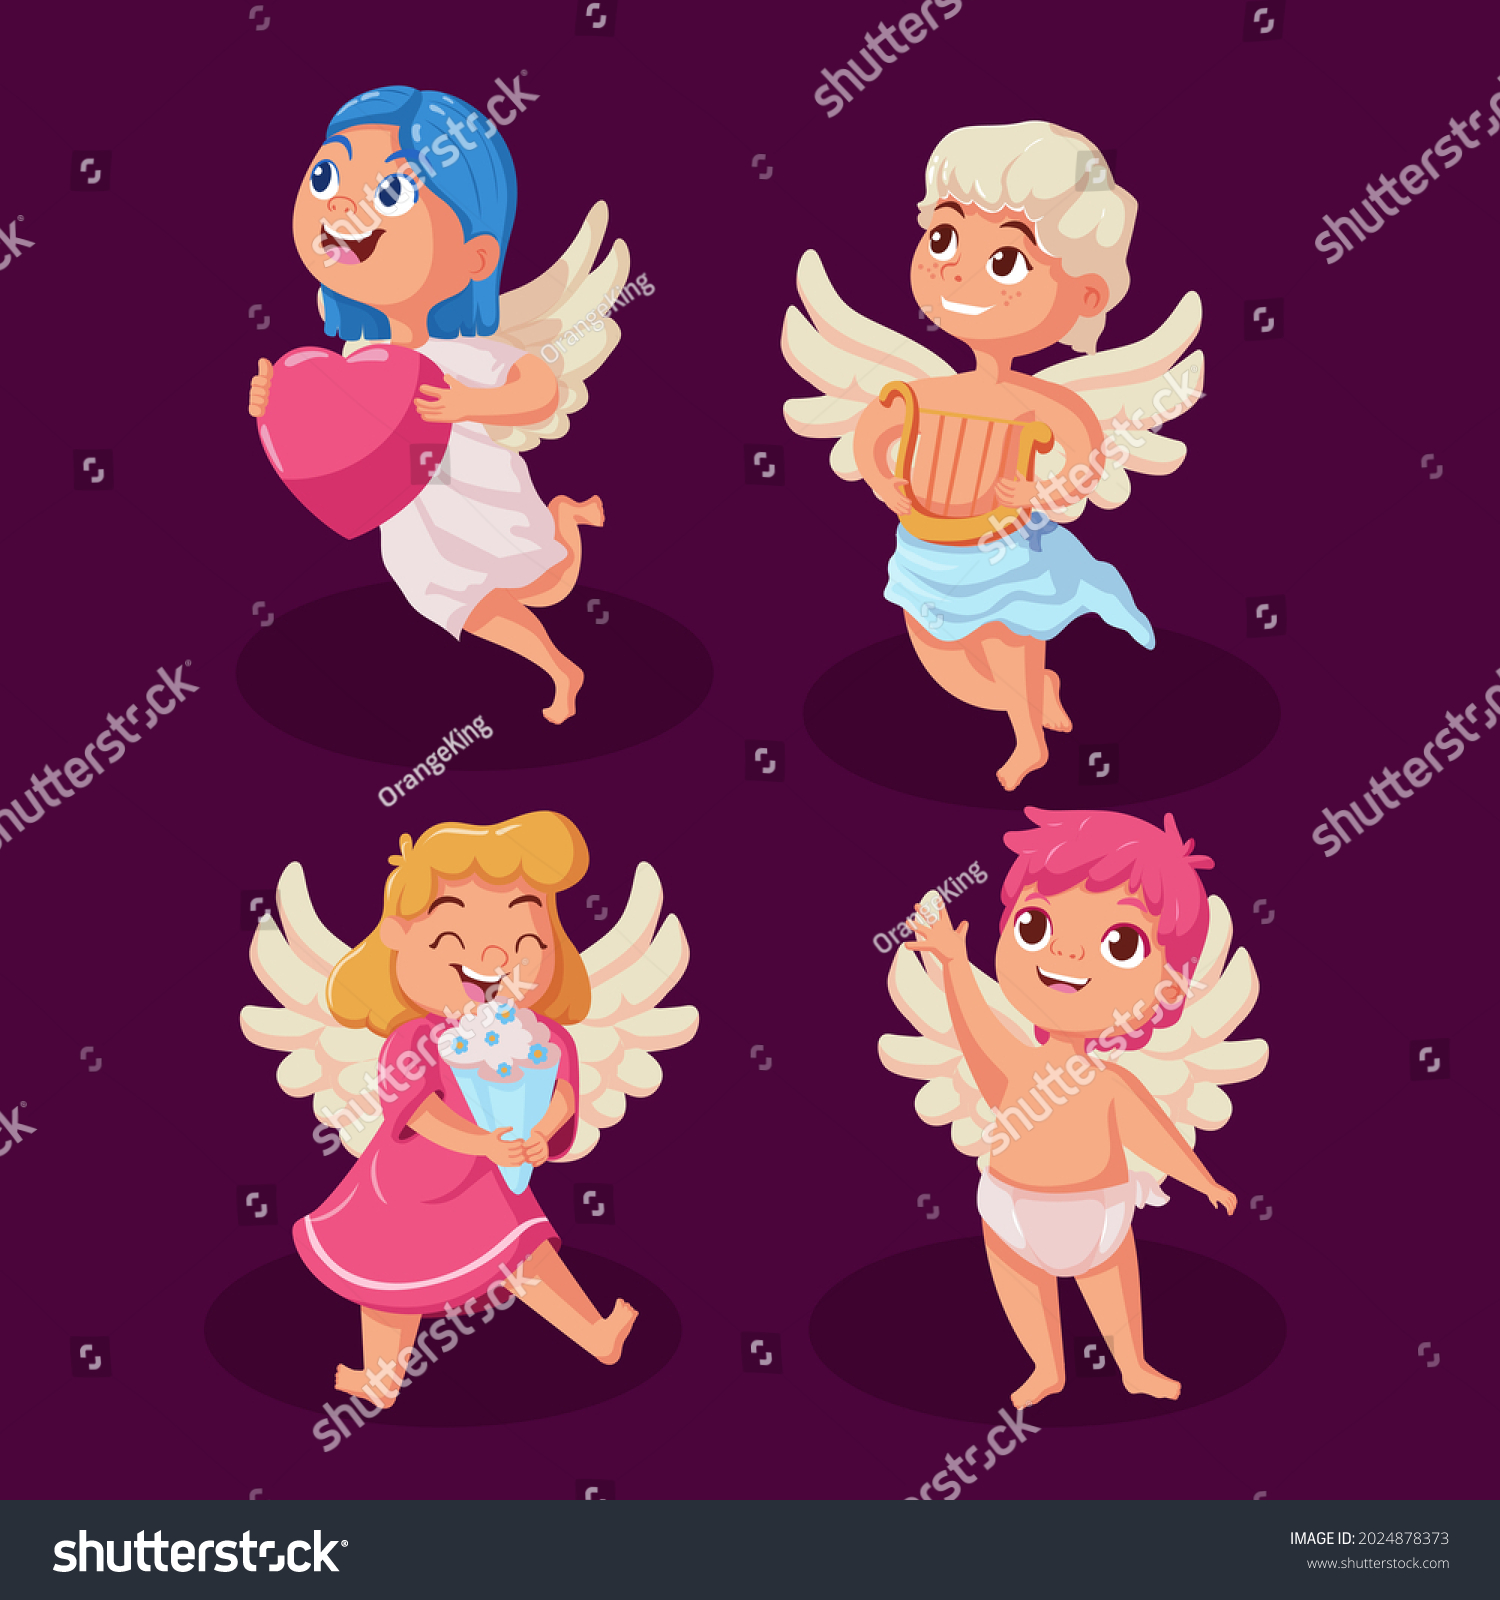 Cartoon Cupid Character Collection Angel Heart Stock Vector Royalty Free 2024878373 Shutterstock 9463